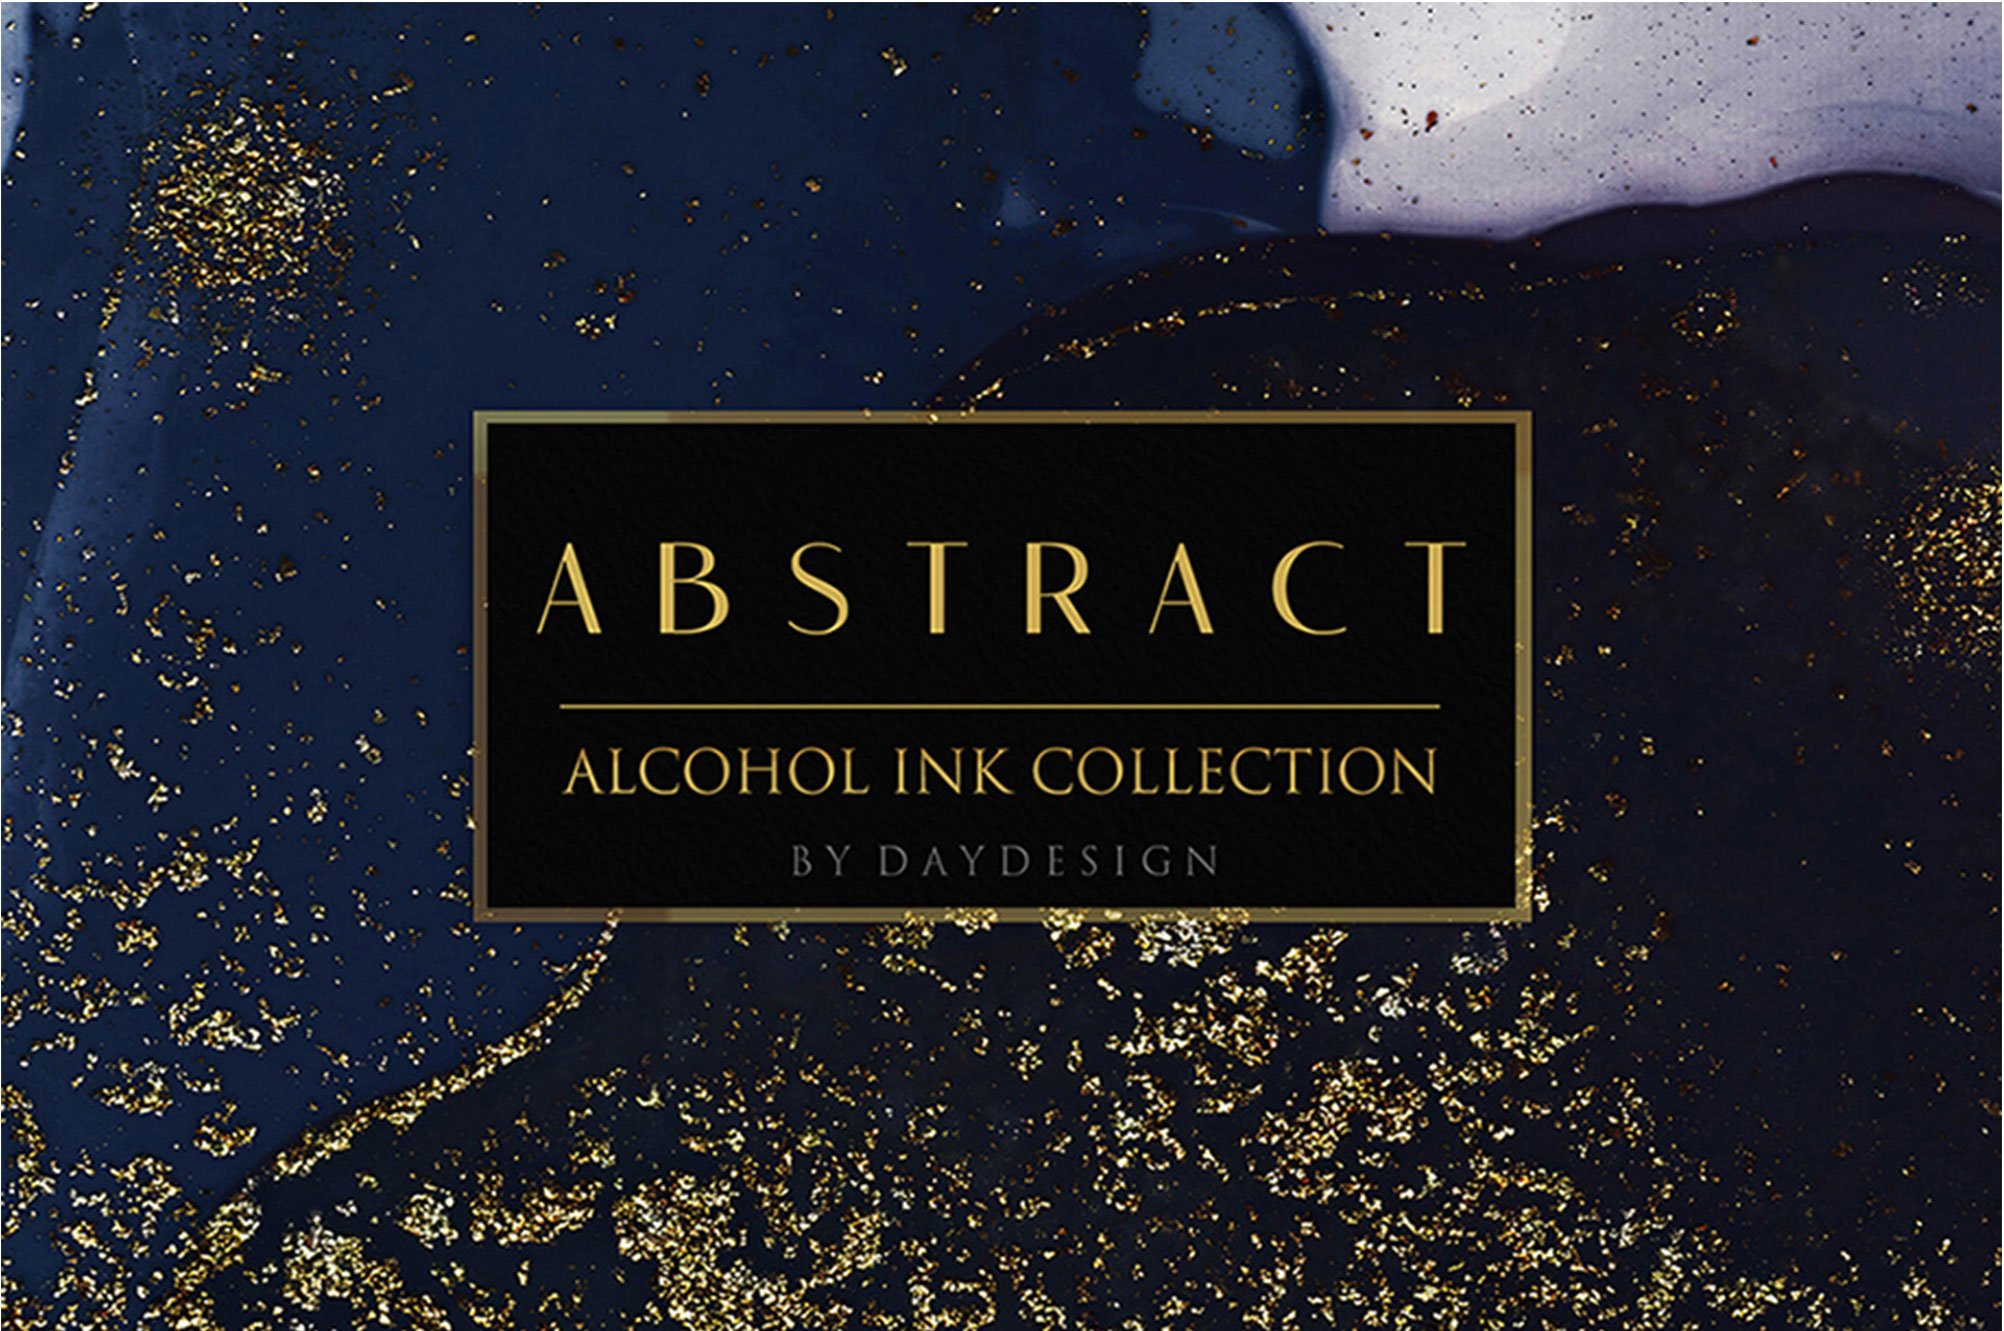 Abstract Alcohol Ink Collection